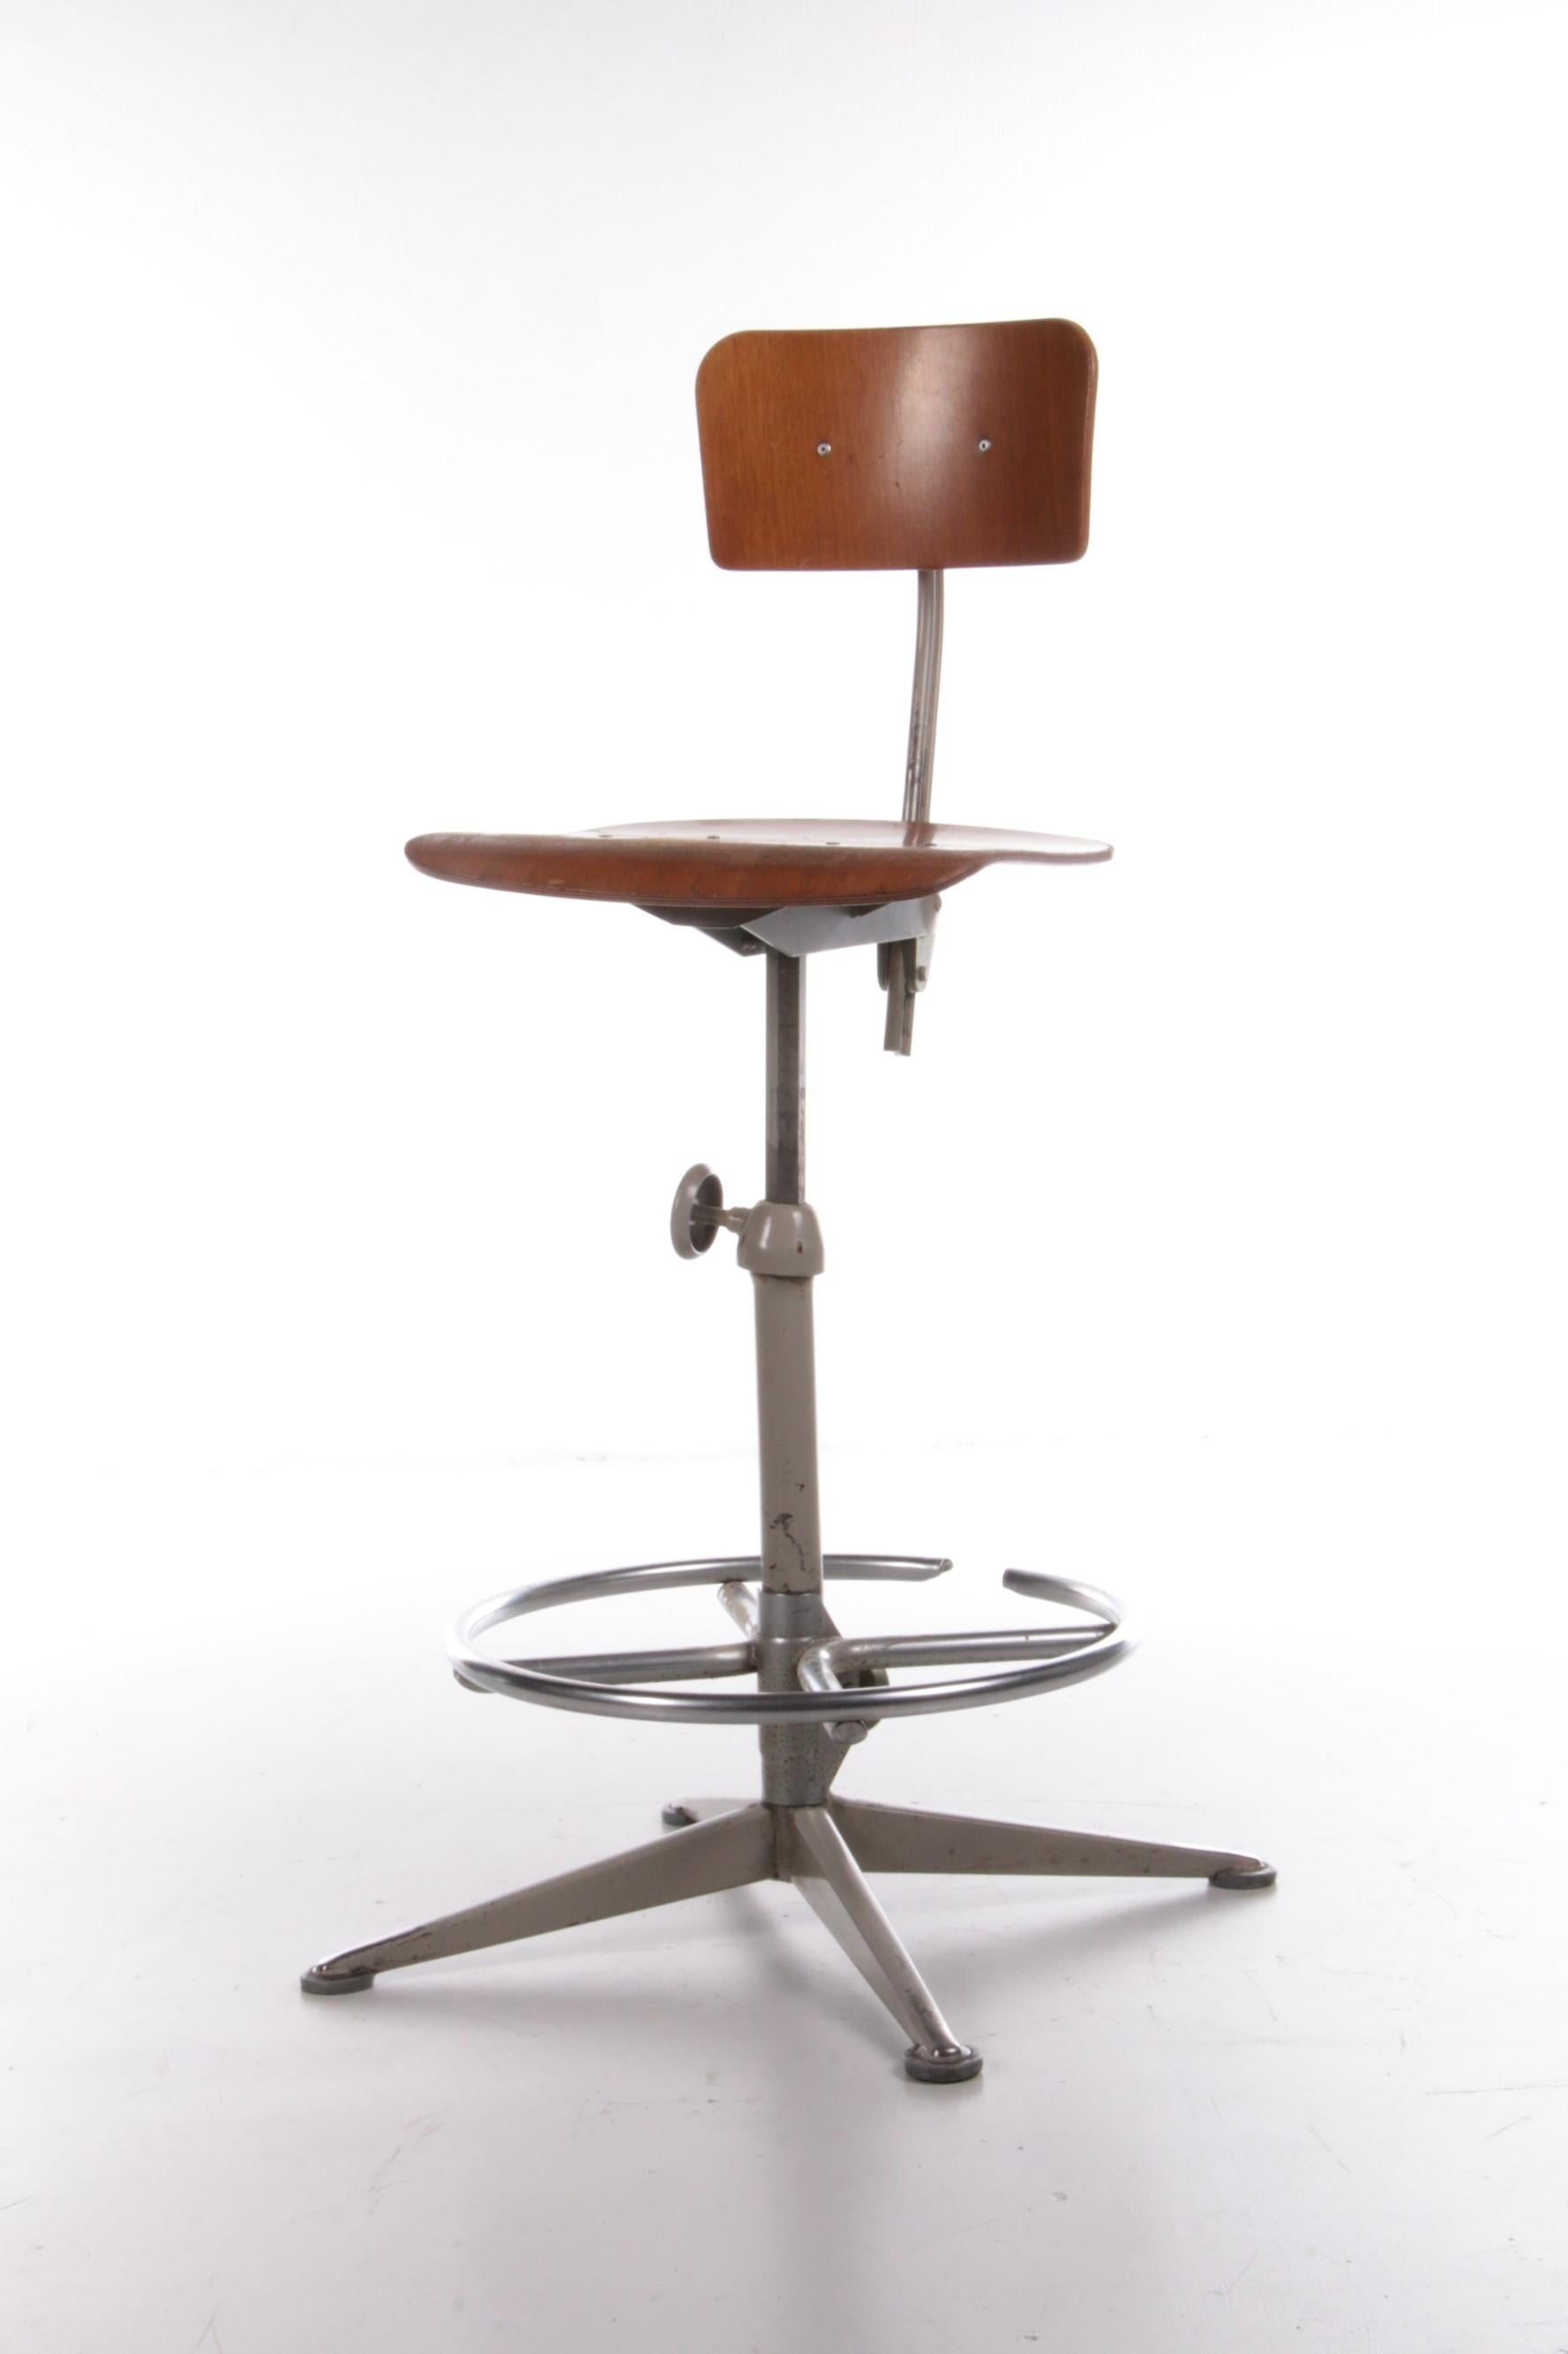 Iron Industrial Drawing Table Chair by Friso Kramer for Ahrend, ca 1960